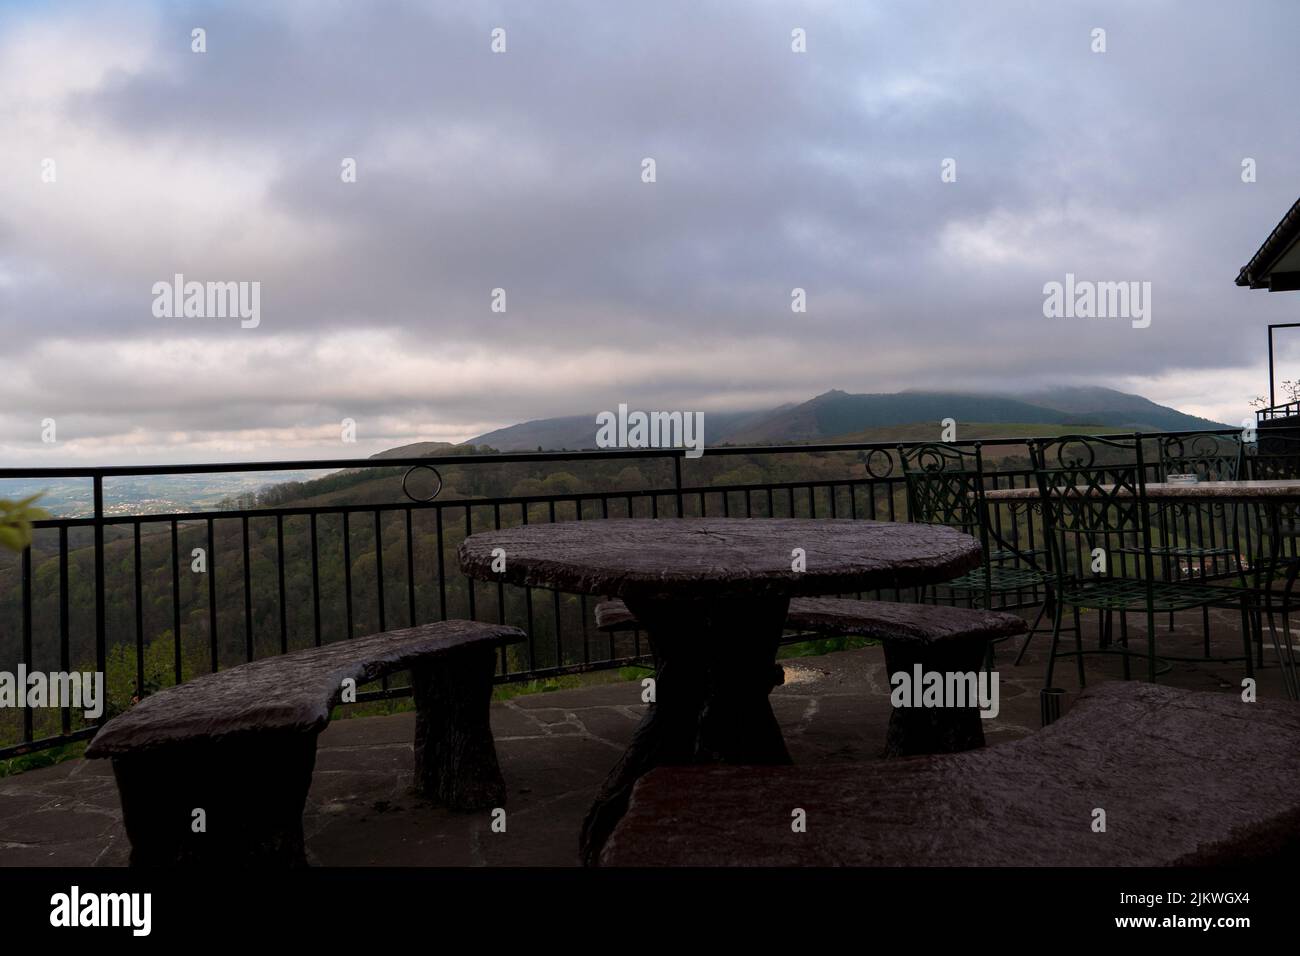 A viewpoint destination with a table and benches looking out to a mountainous view in the distance Stock Photo